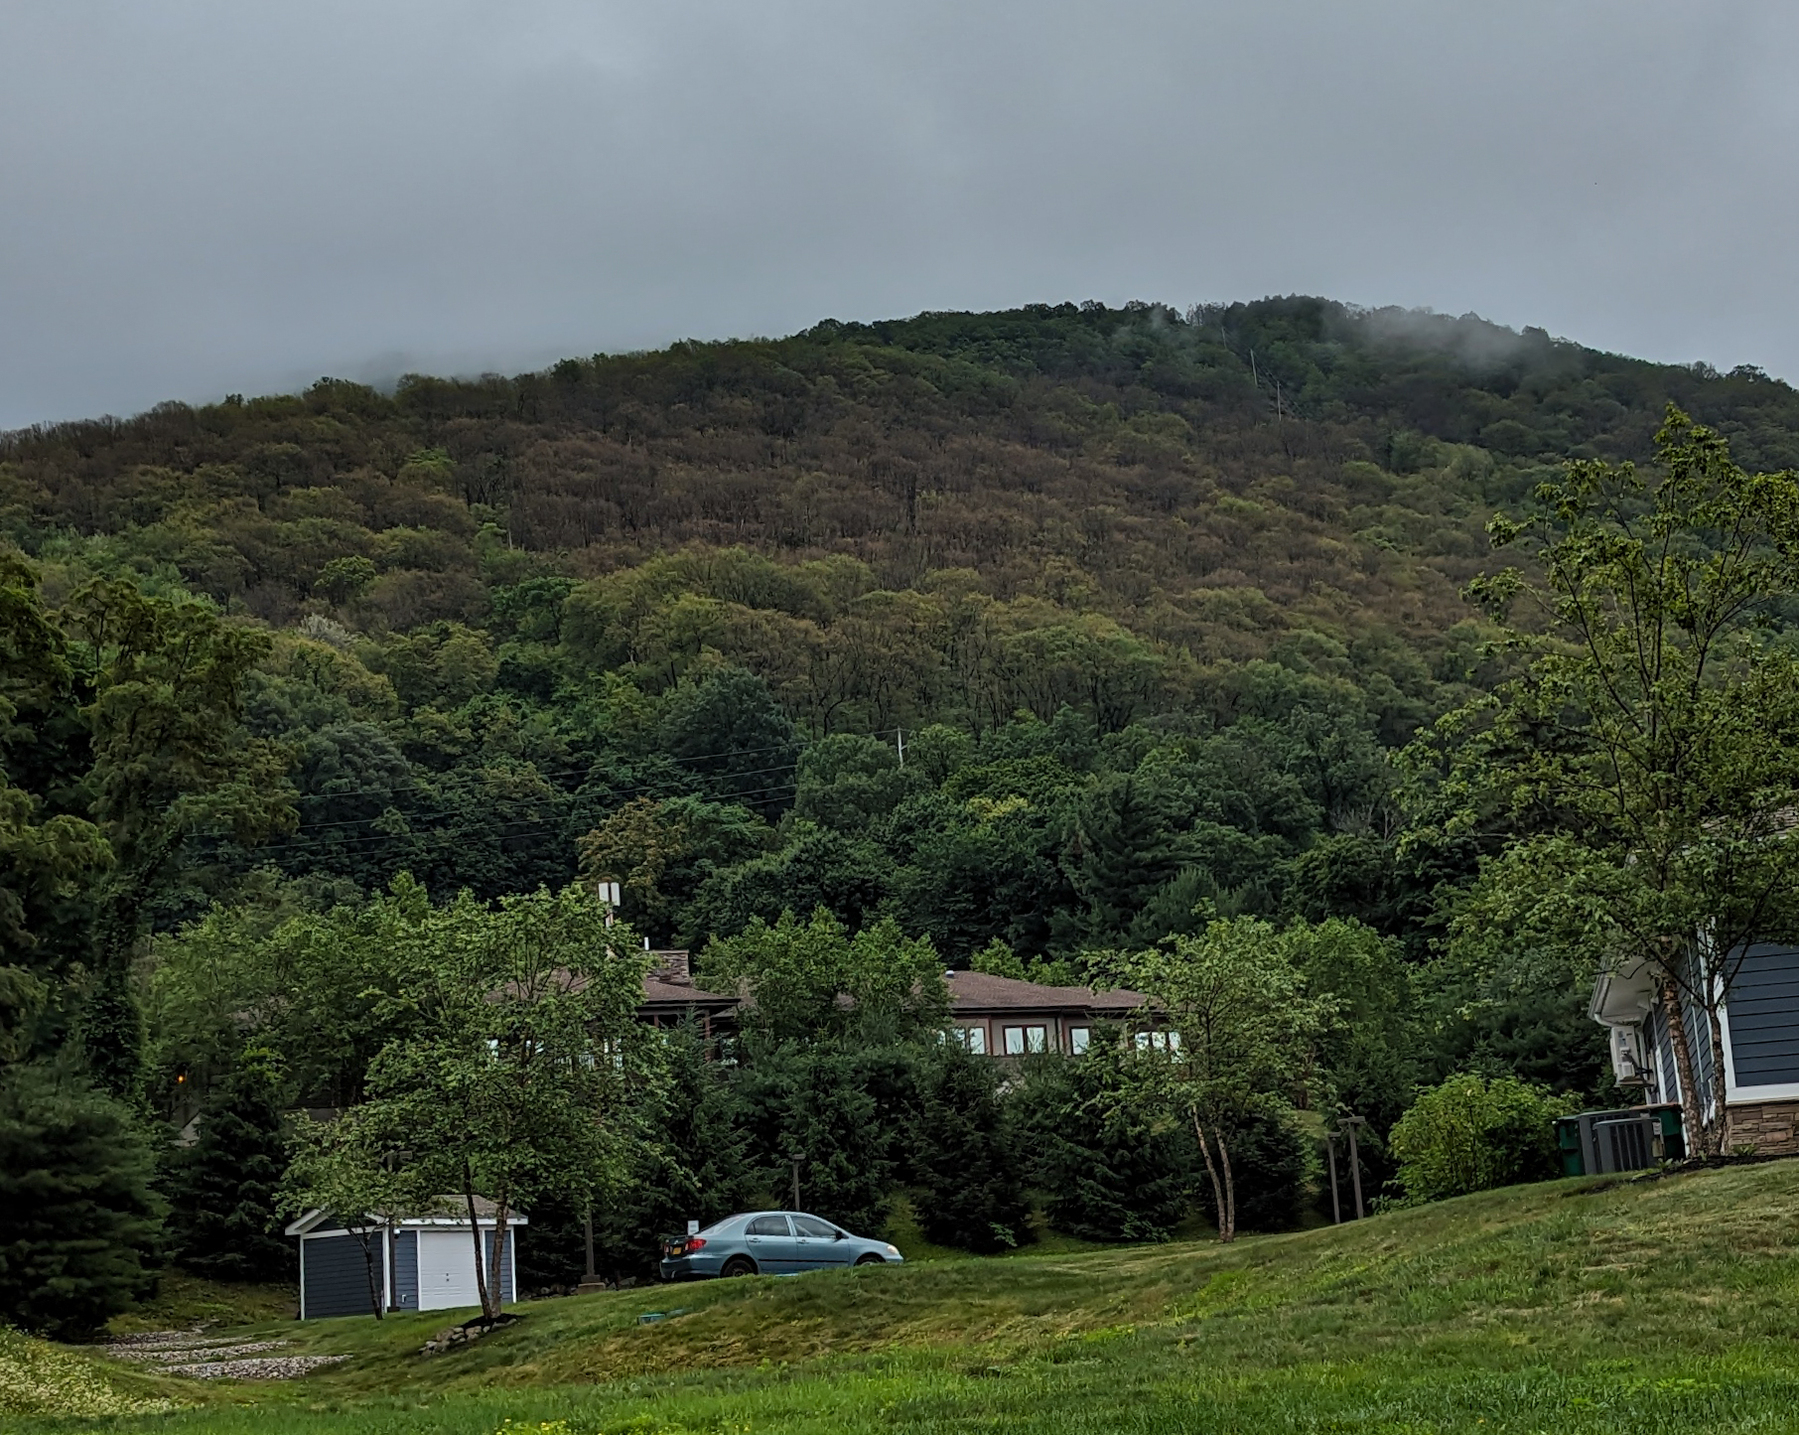 Mount Beacon, from the town level. The mountain is covered with trees all the way to the top, where It's covered with a bit of a low grey cloud. There's a car and a house in the foreground. 